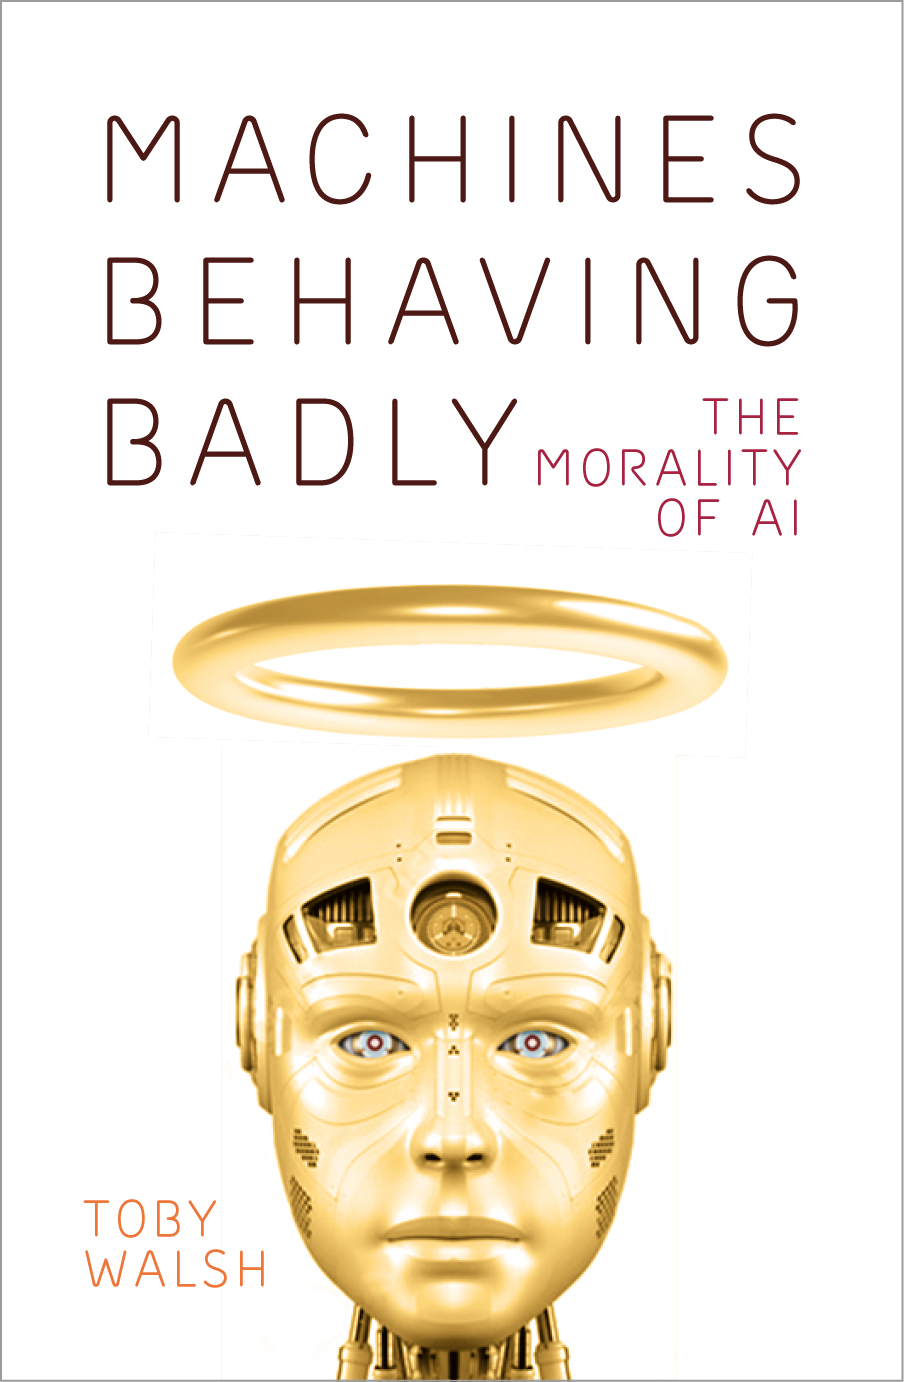 Machines Behaving Badly: The morality of AI